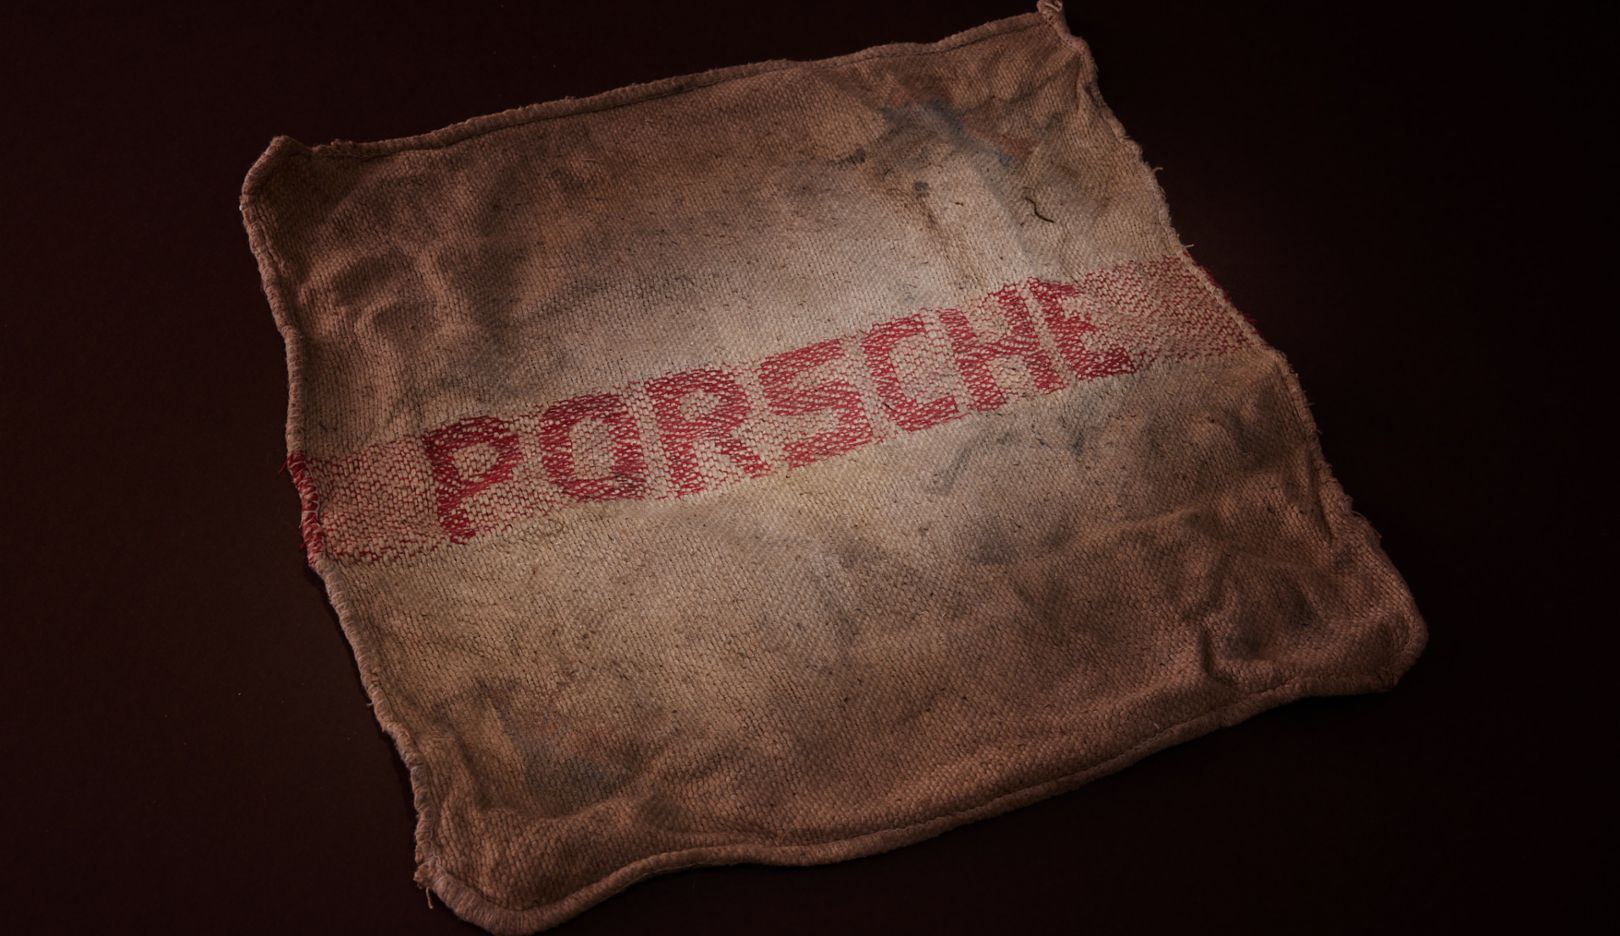 More than 50 years later, the Porsche cloth still smells of oil.